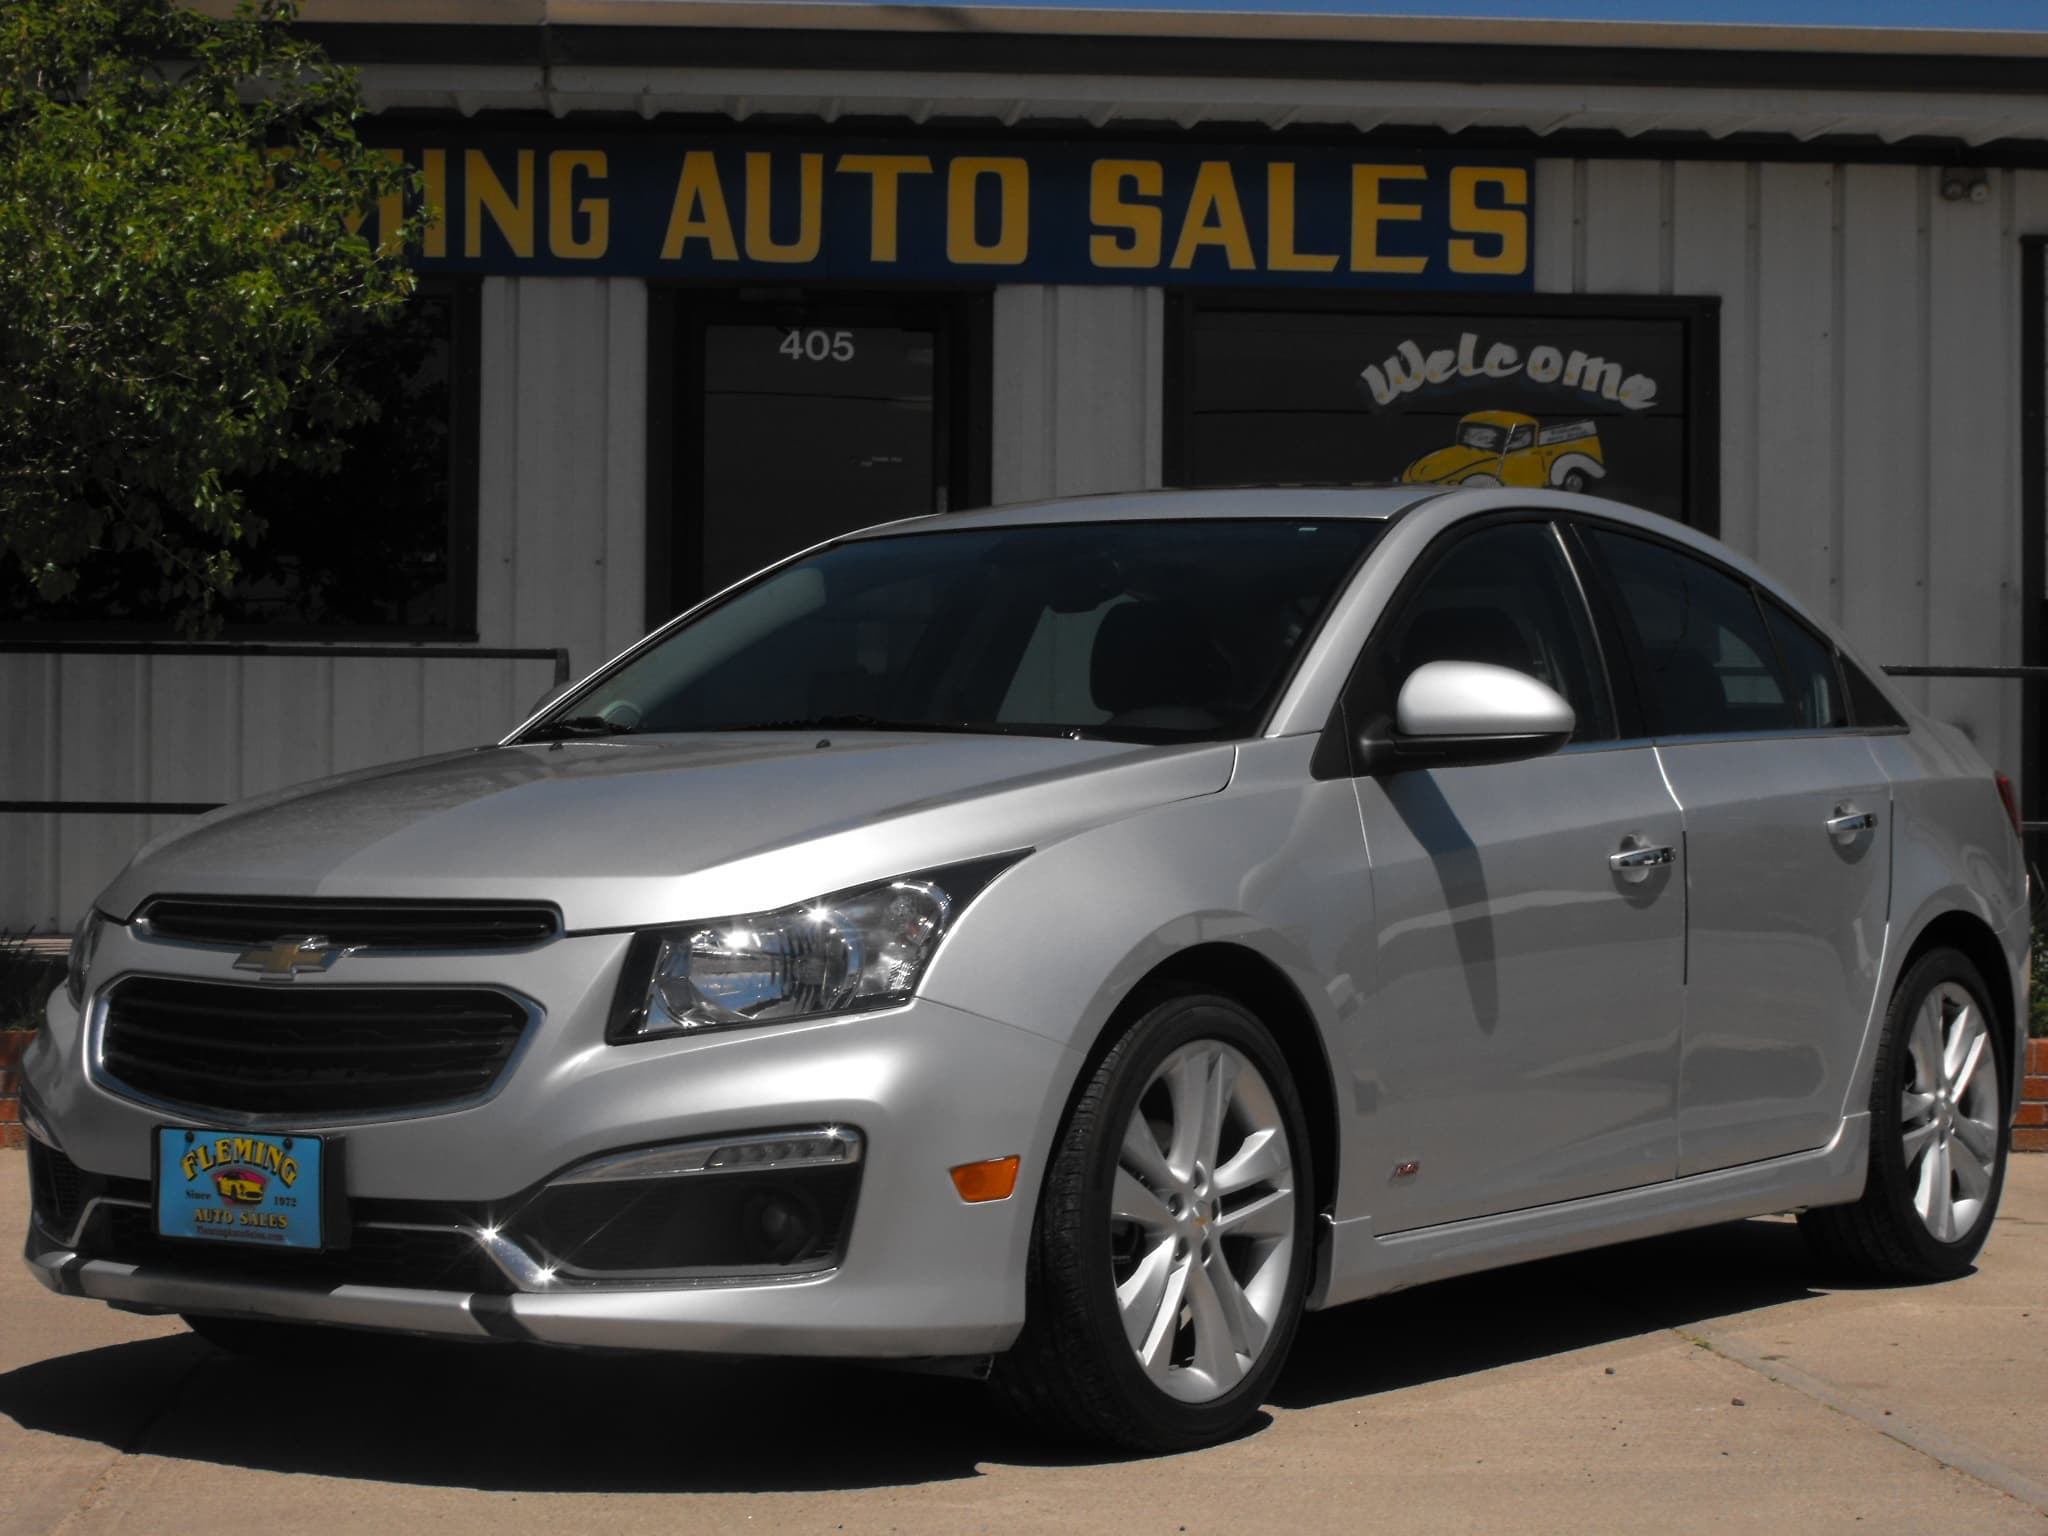 Fleming Auto Sales - Sterling, CO, US, used car dealerships near me